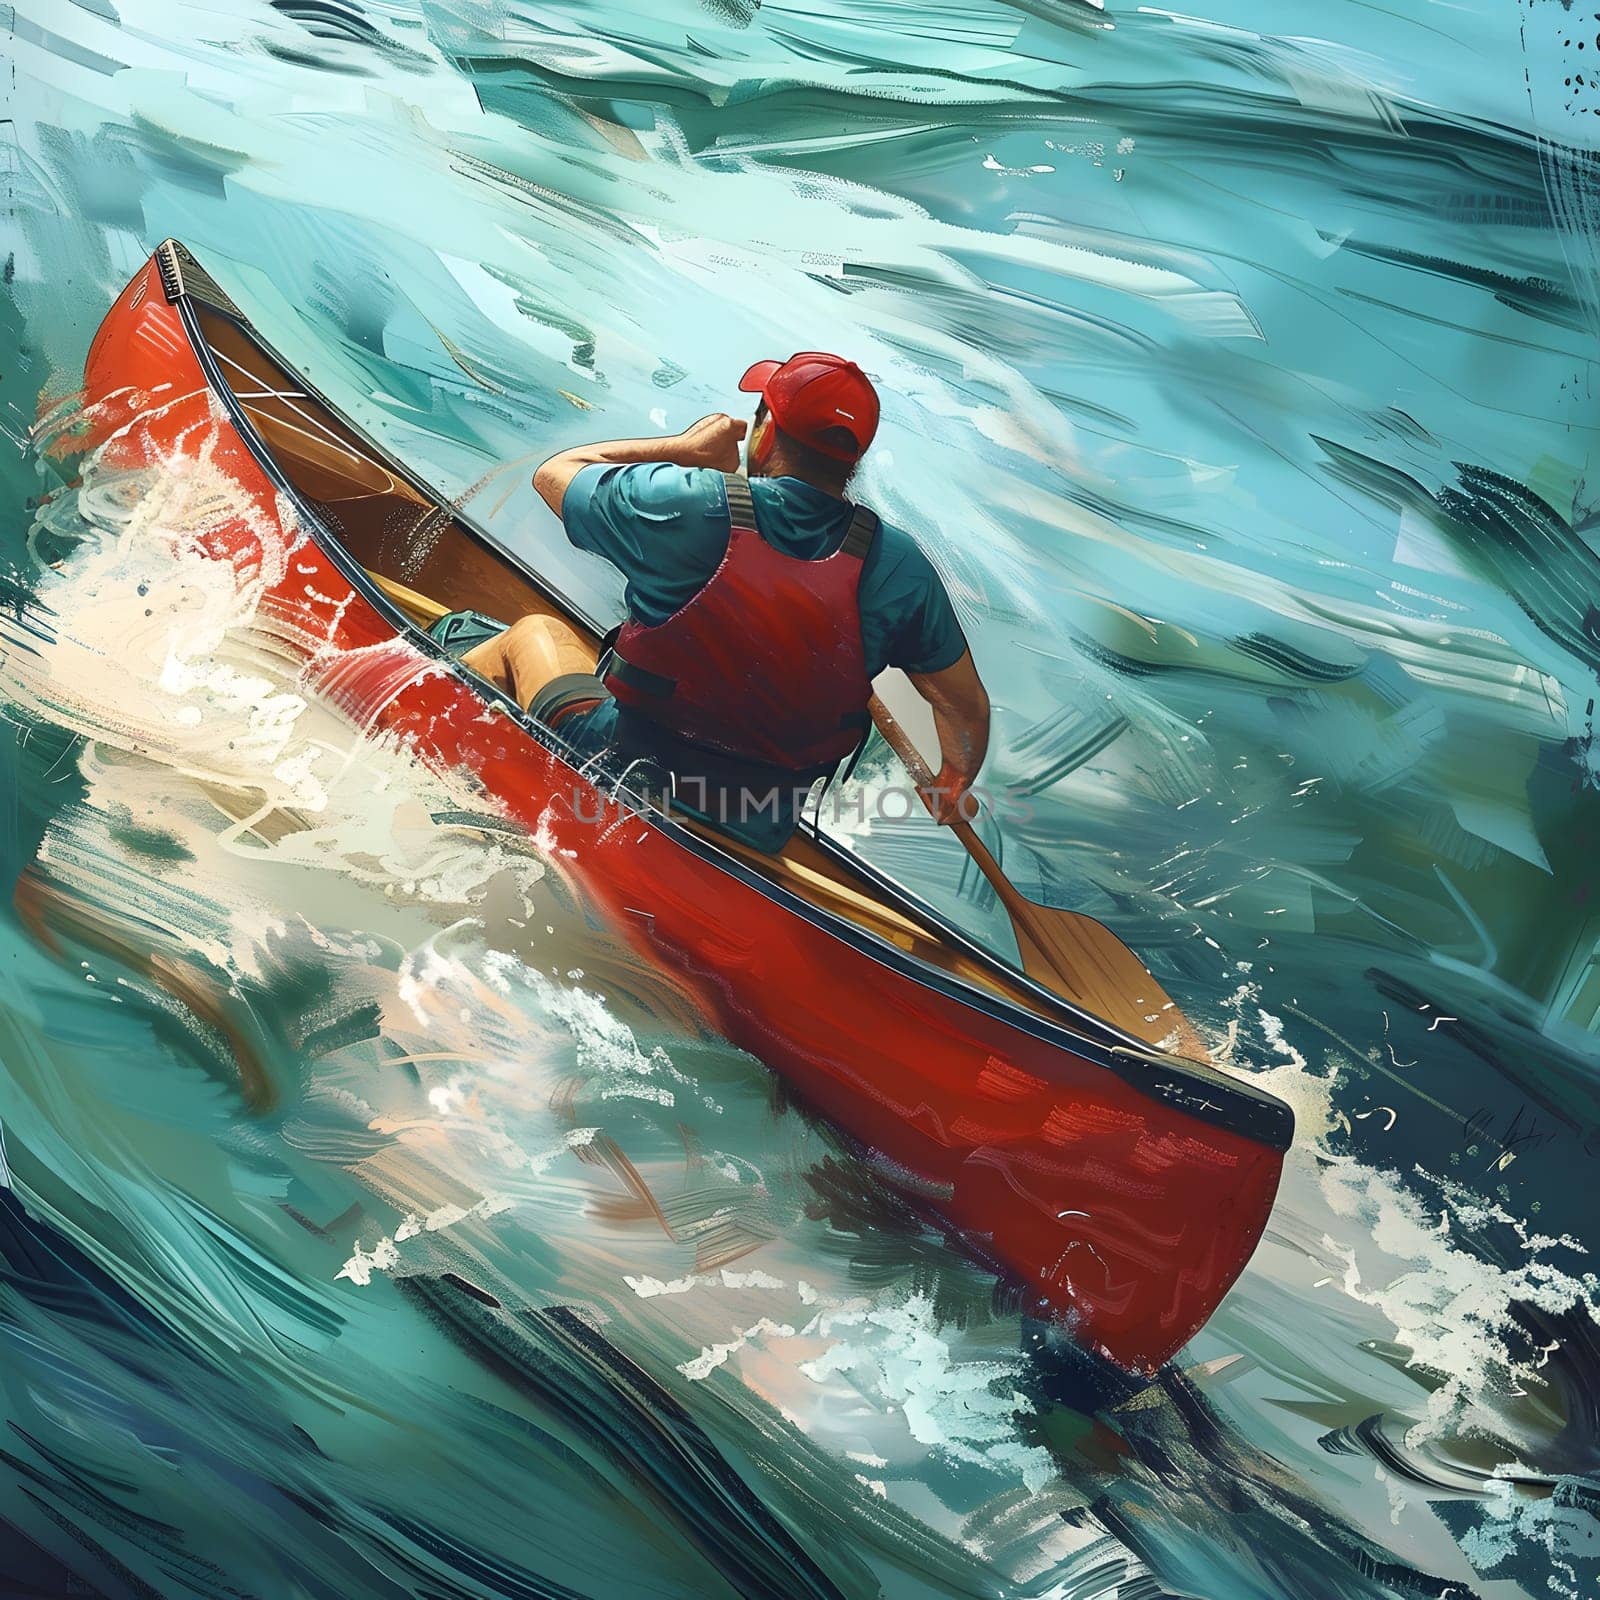 Man in a red canoe paddles on water, enjoying outdoor recreation by Nadtochiy